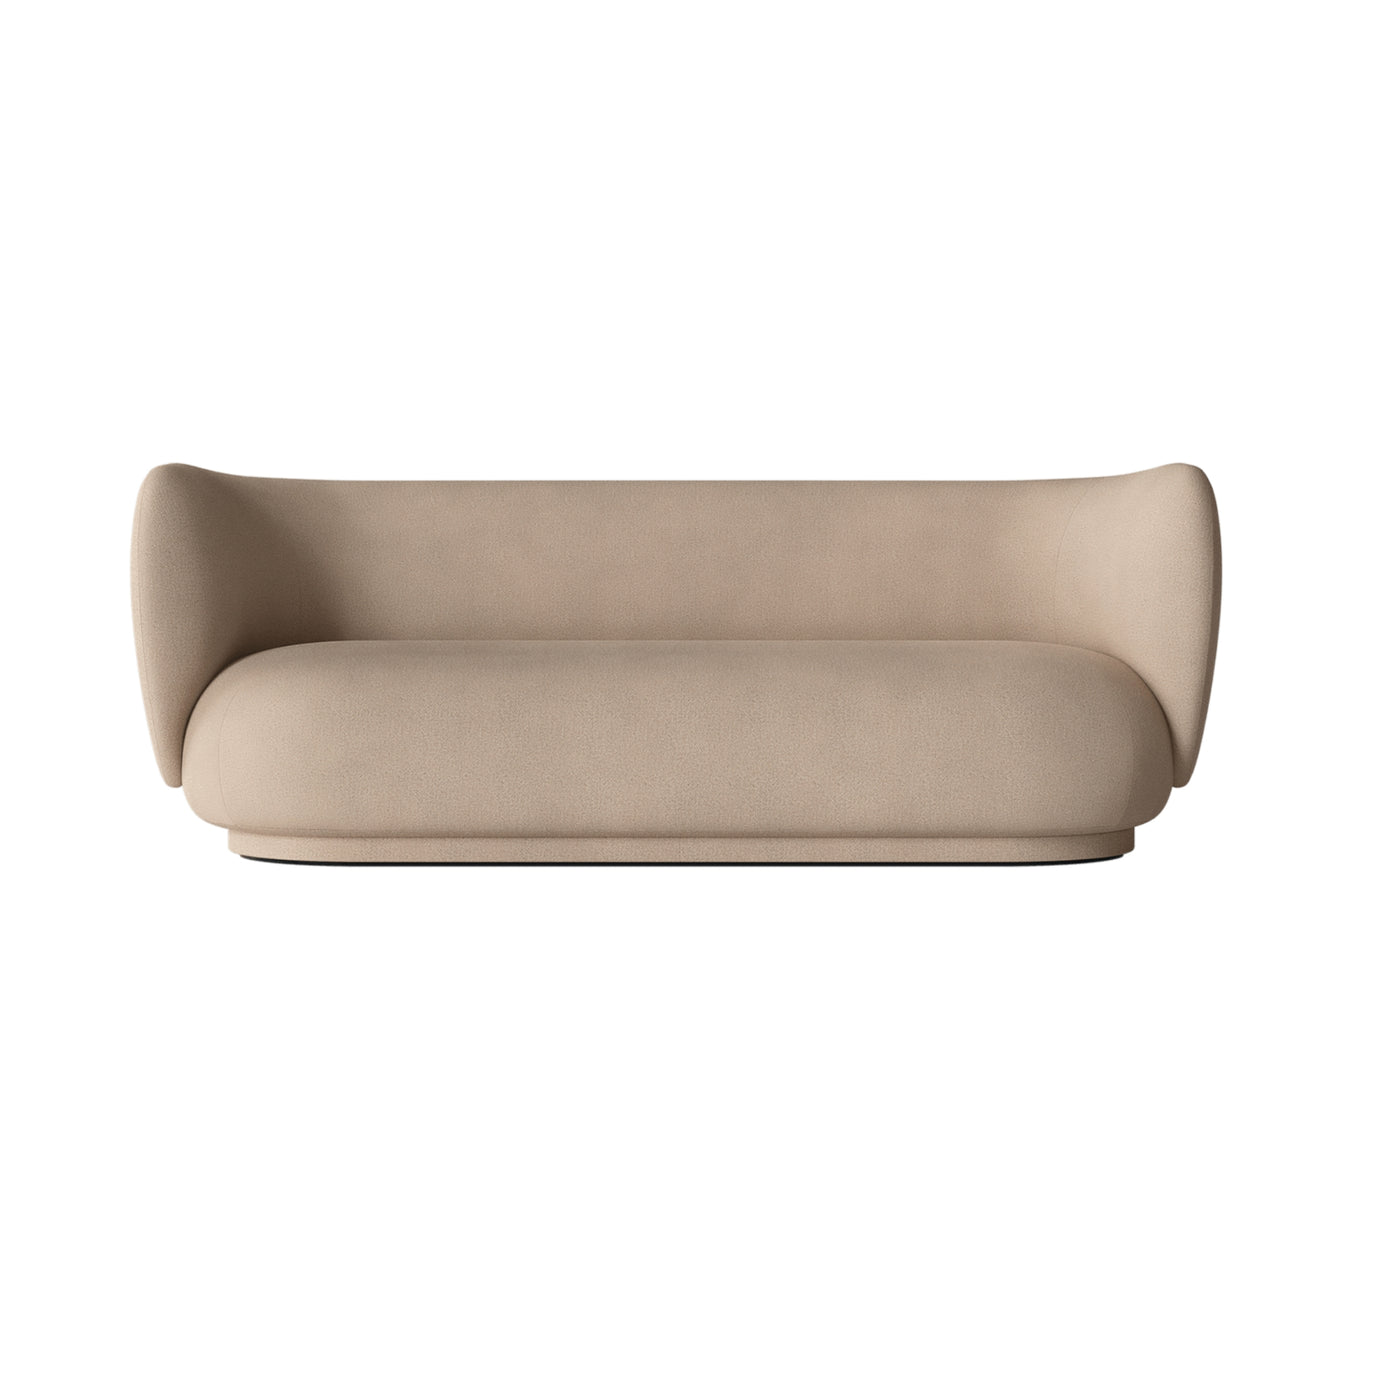 ferm LIVING Rico 3 seater sofa. Made to order from someday designs. #colour_sand-soft